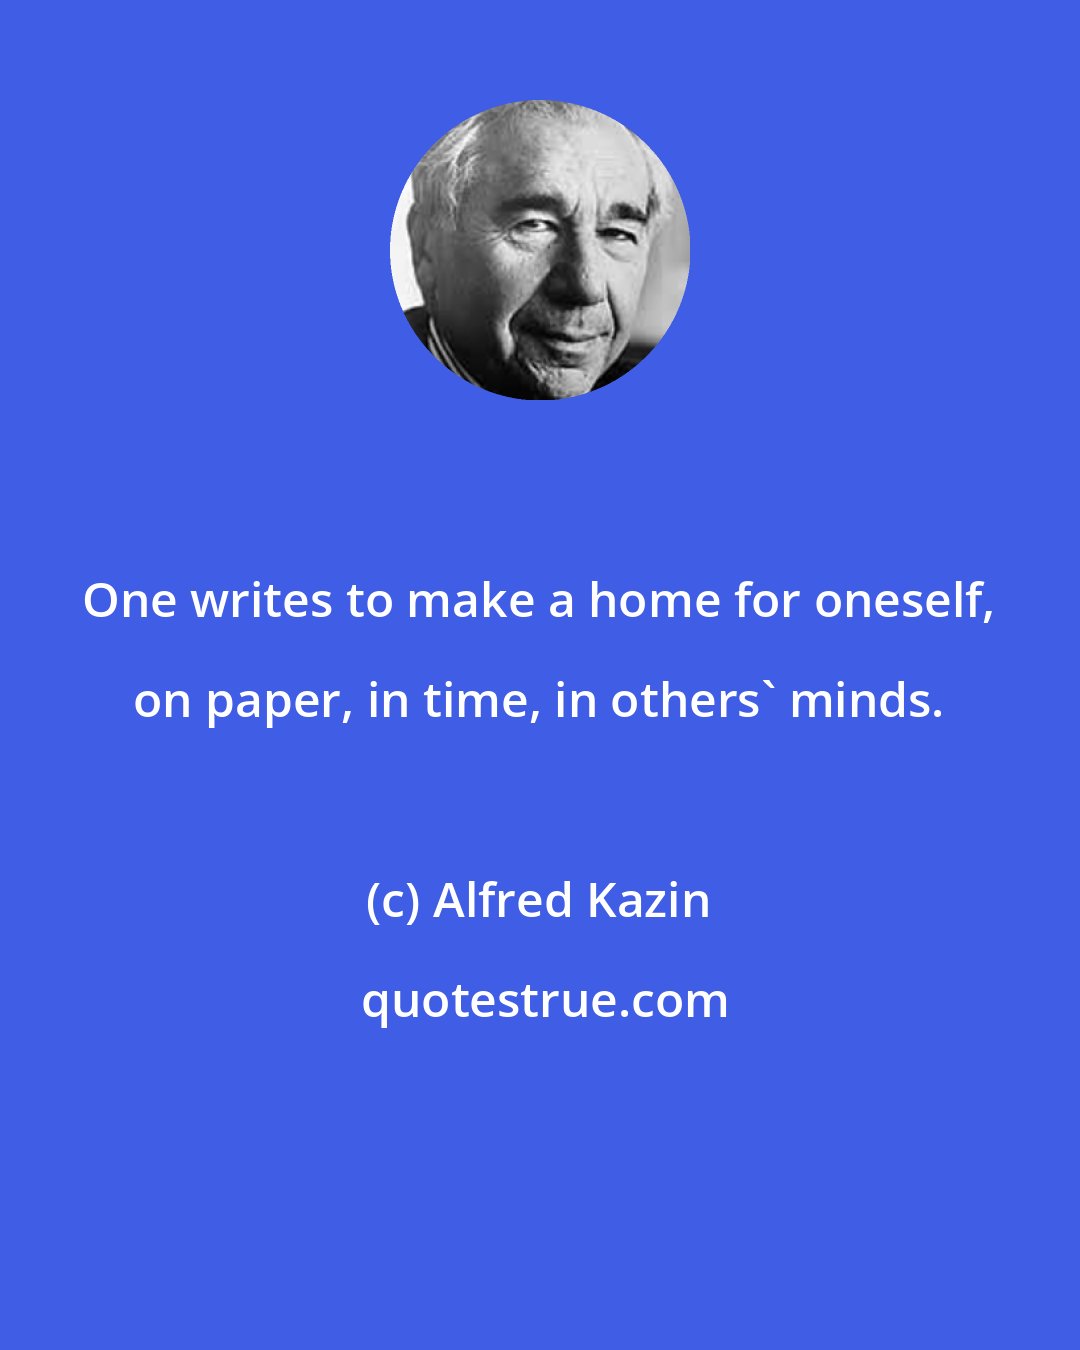 Alfred Kazin: One writes to make a home for oneself, on paper, in time, in others' minds.